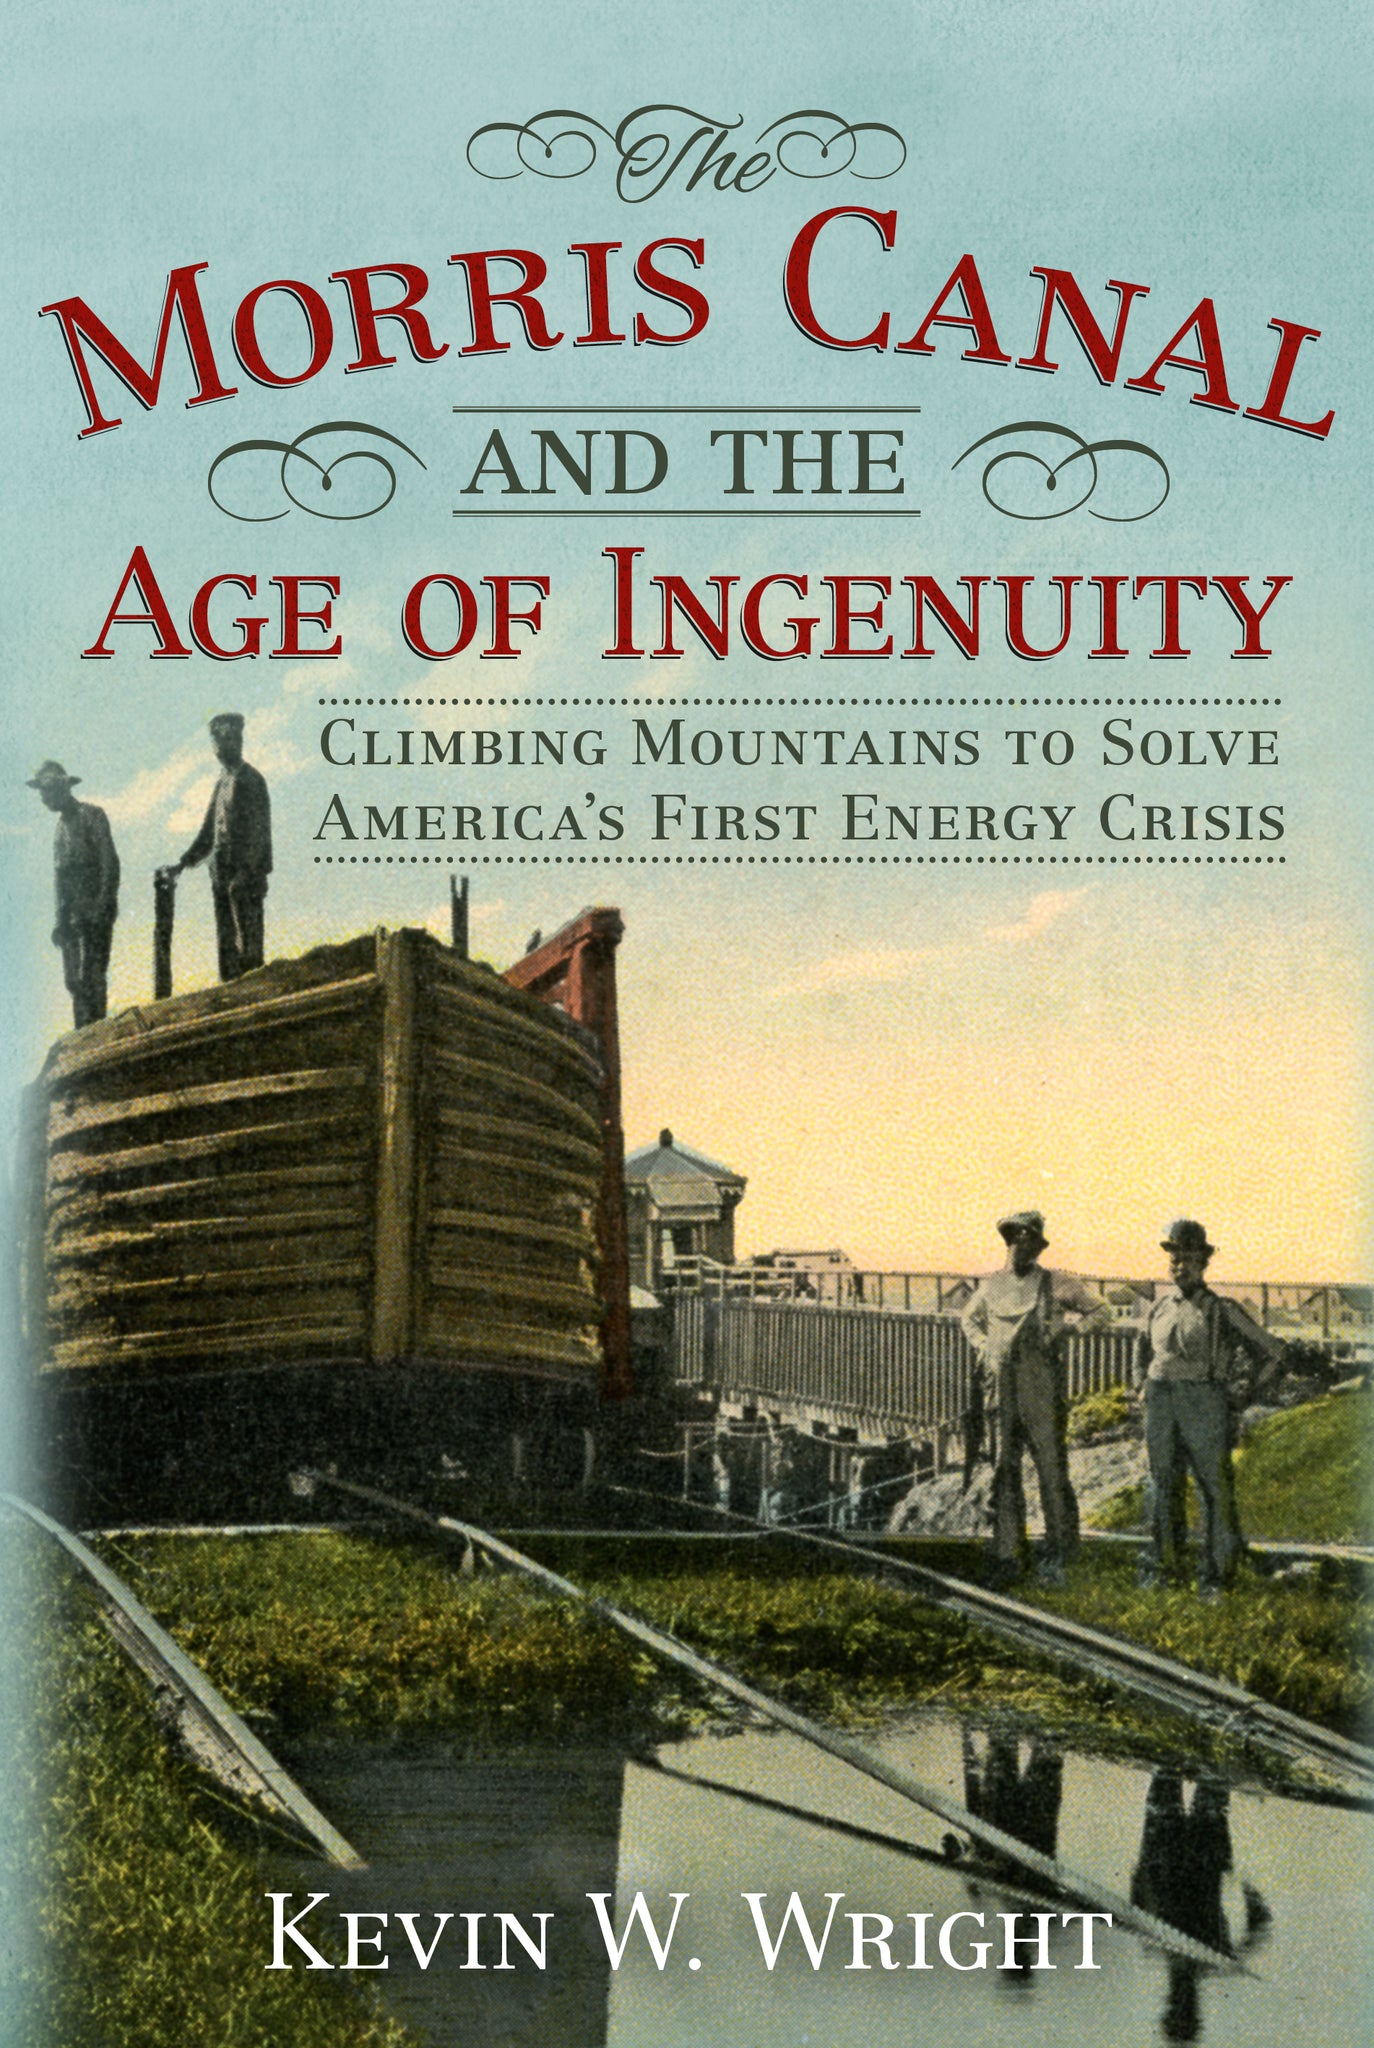 The Morris Canal and the Age of Ingenuity: Climbing Mountains to Solve America's First Energy Crisis